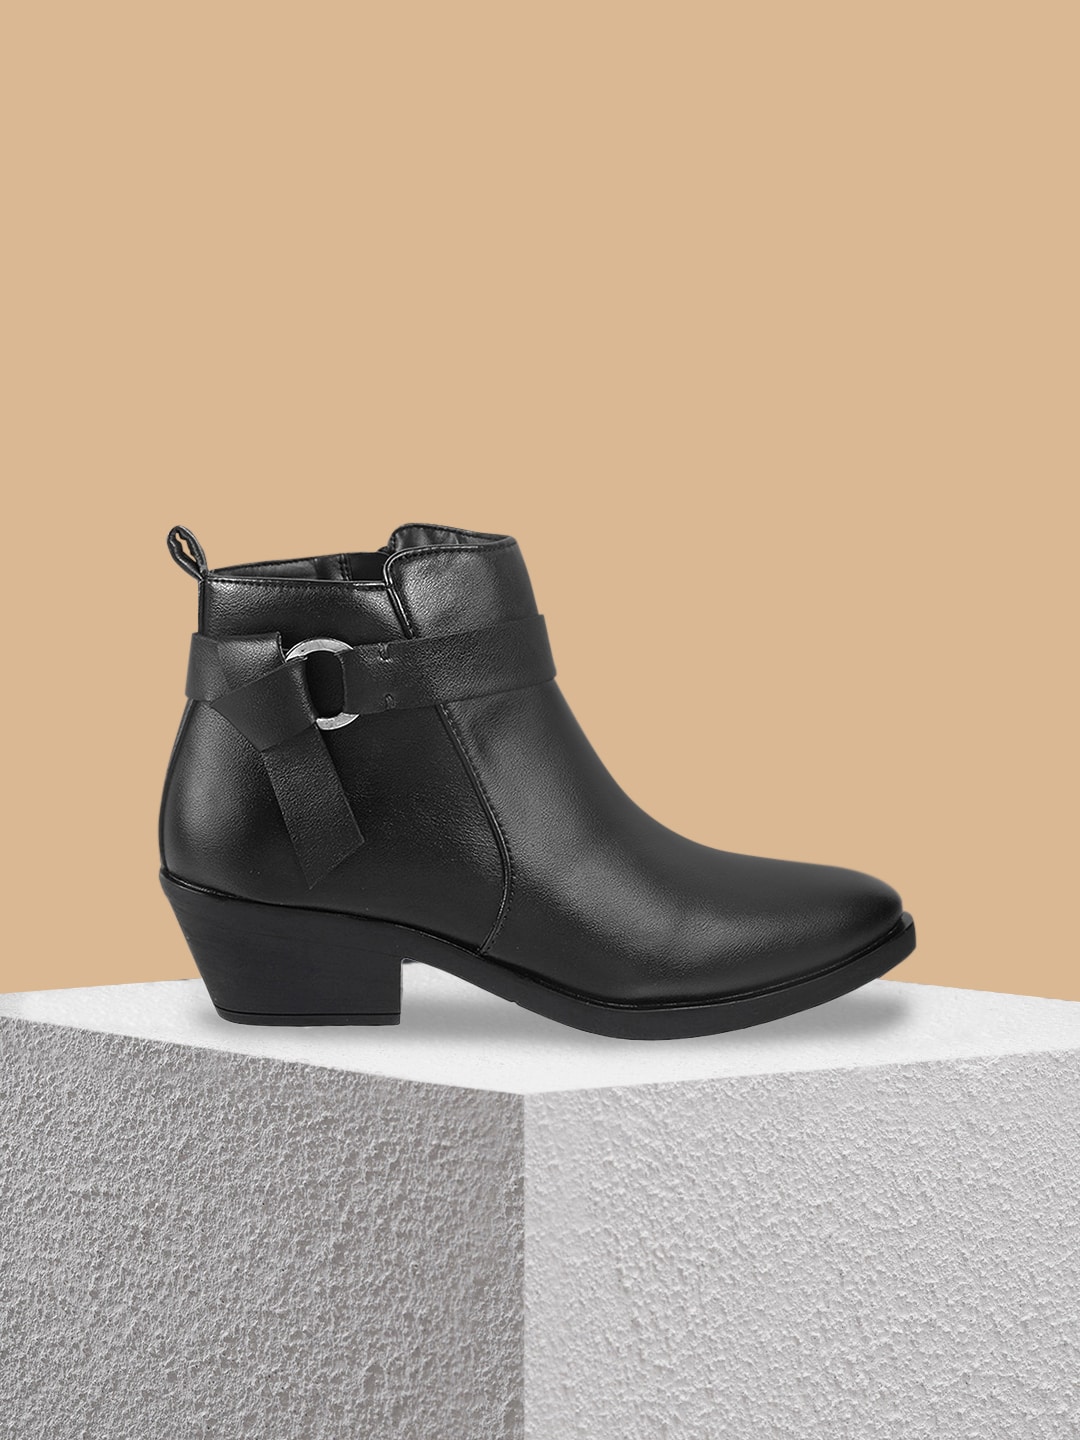 Mochi Black Kitten Heeled Boots with Buckles Price in India